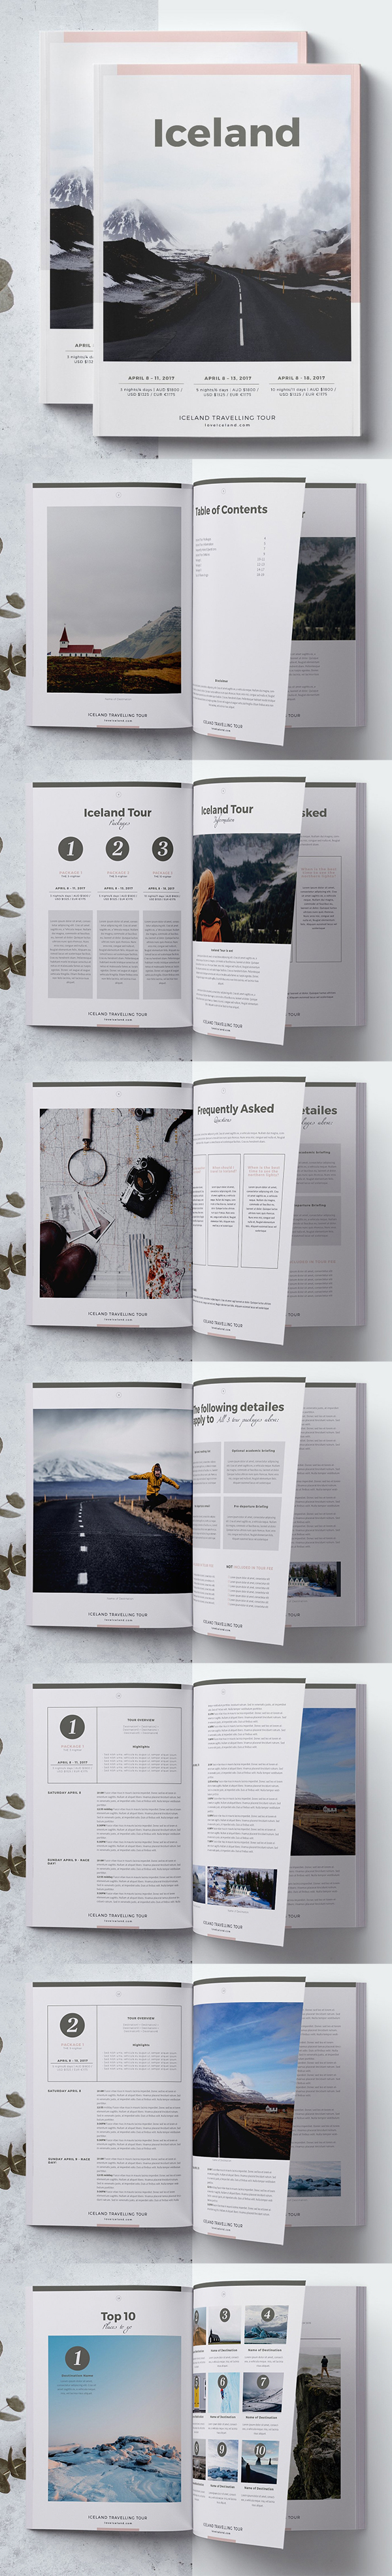 Travel Agency Guide / Brochure Template